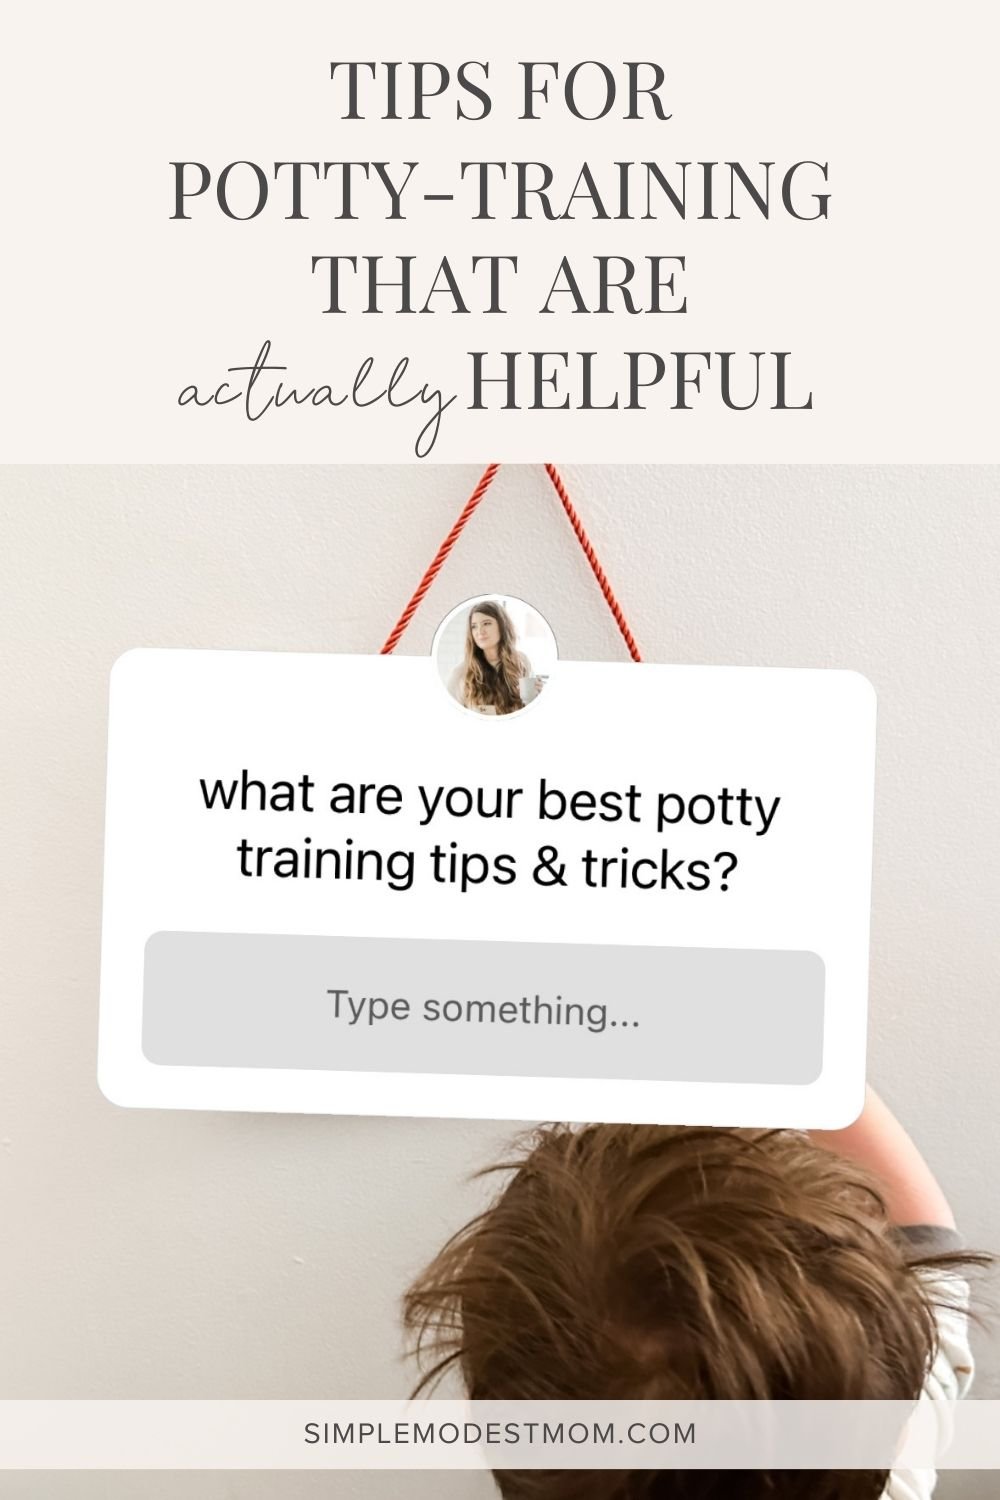 Tips for Potty-Training That Are Actually Helpful from Simple Modest Mom.jpg